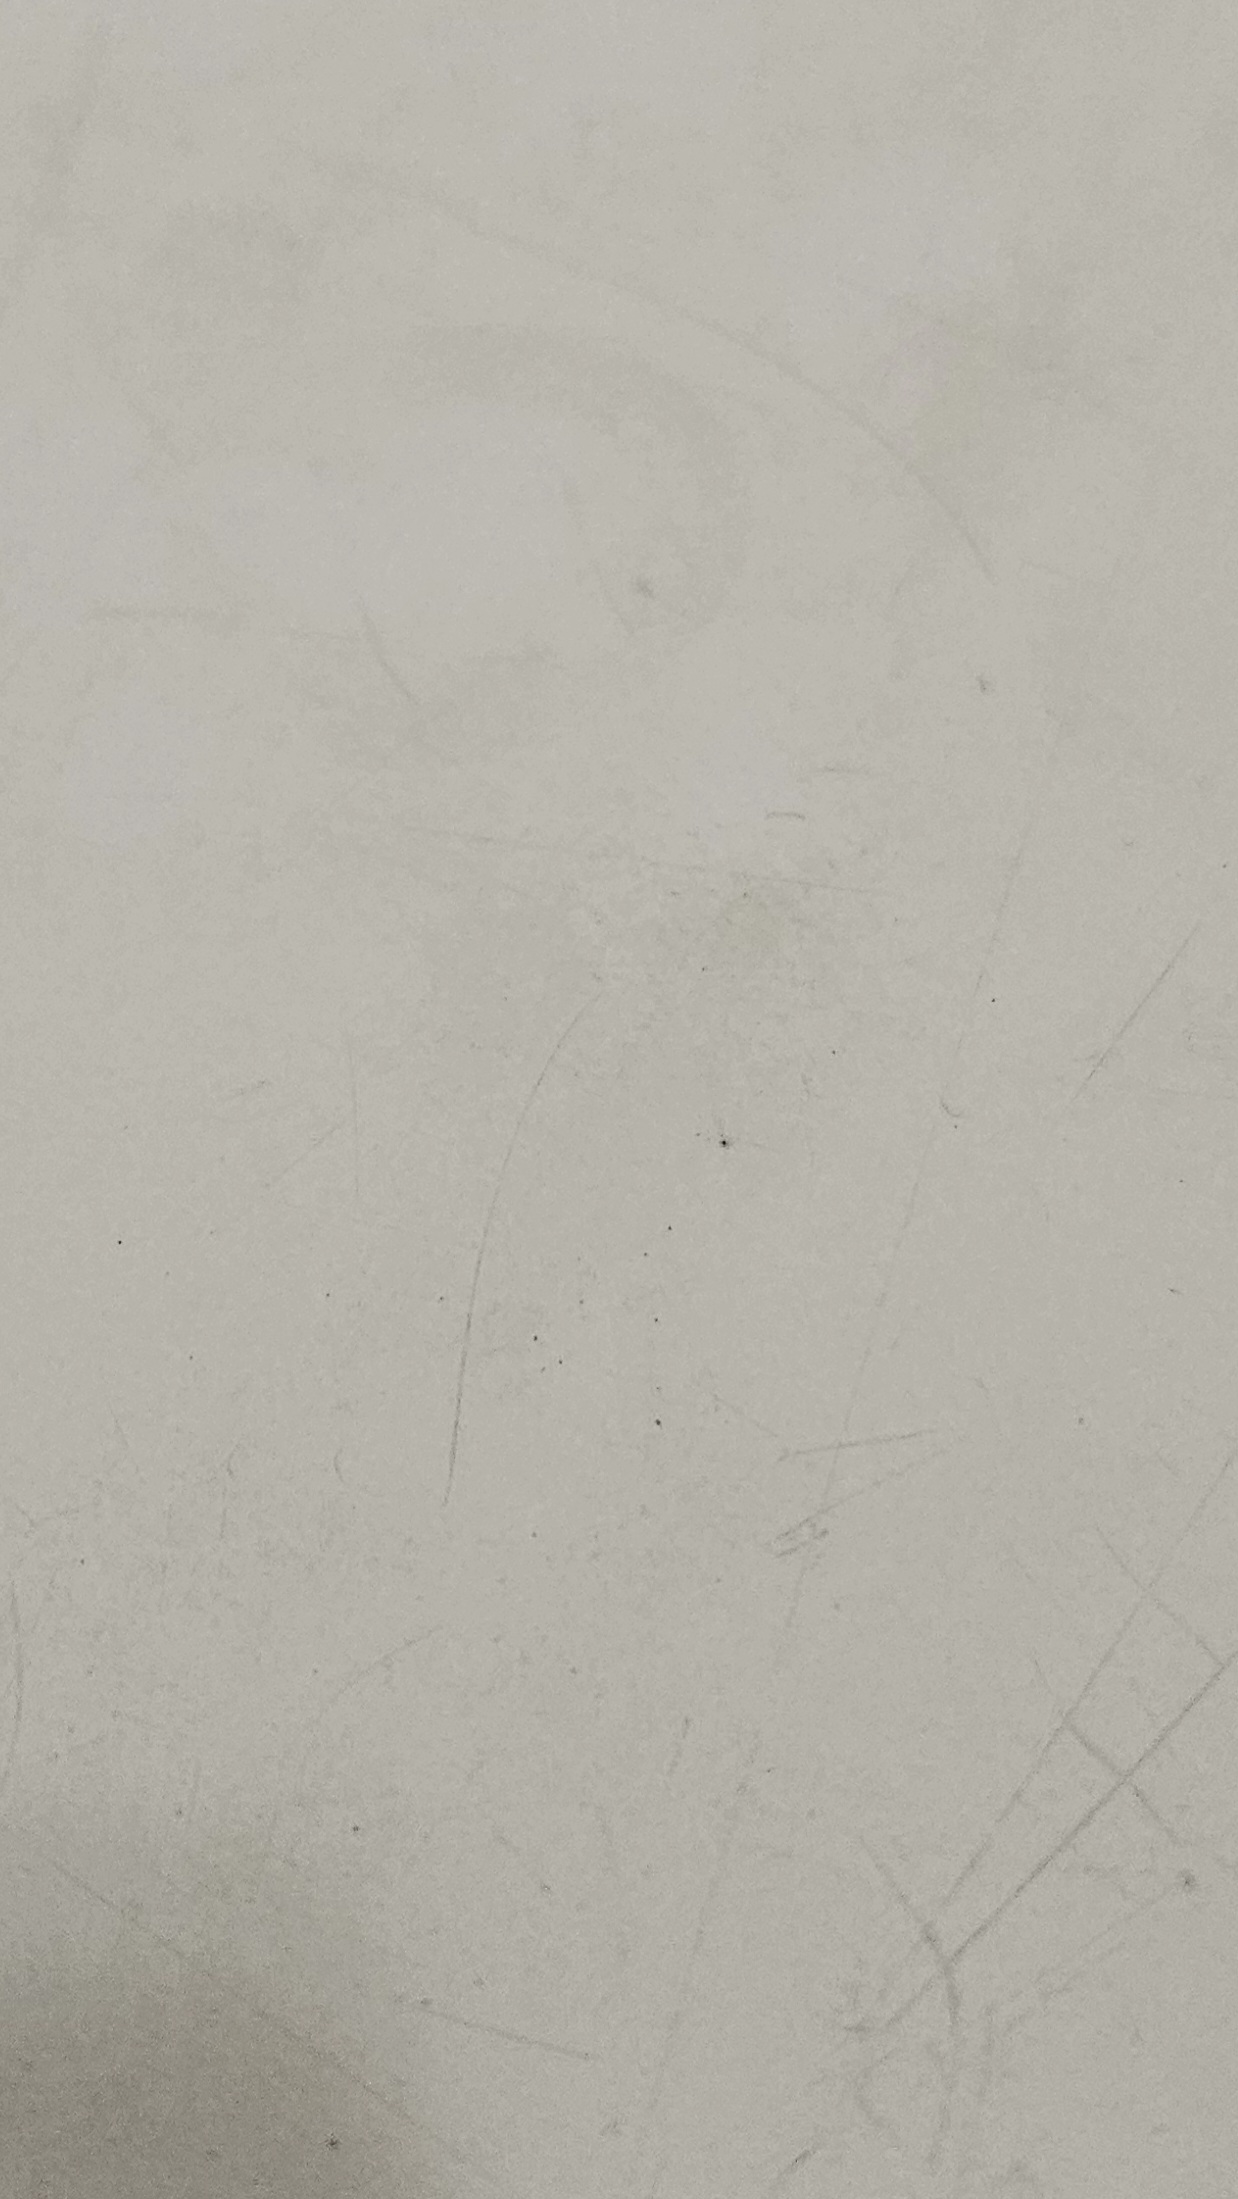 close up picture of bathtub floor discolouration